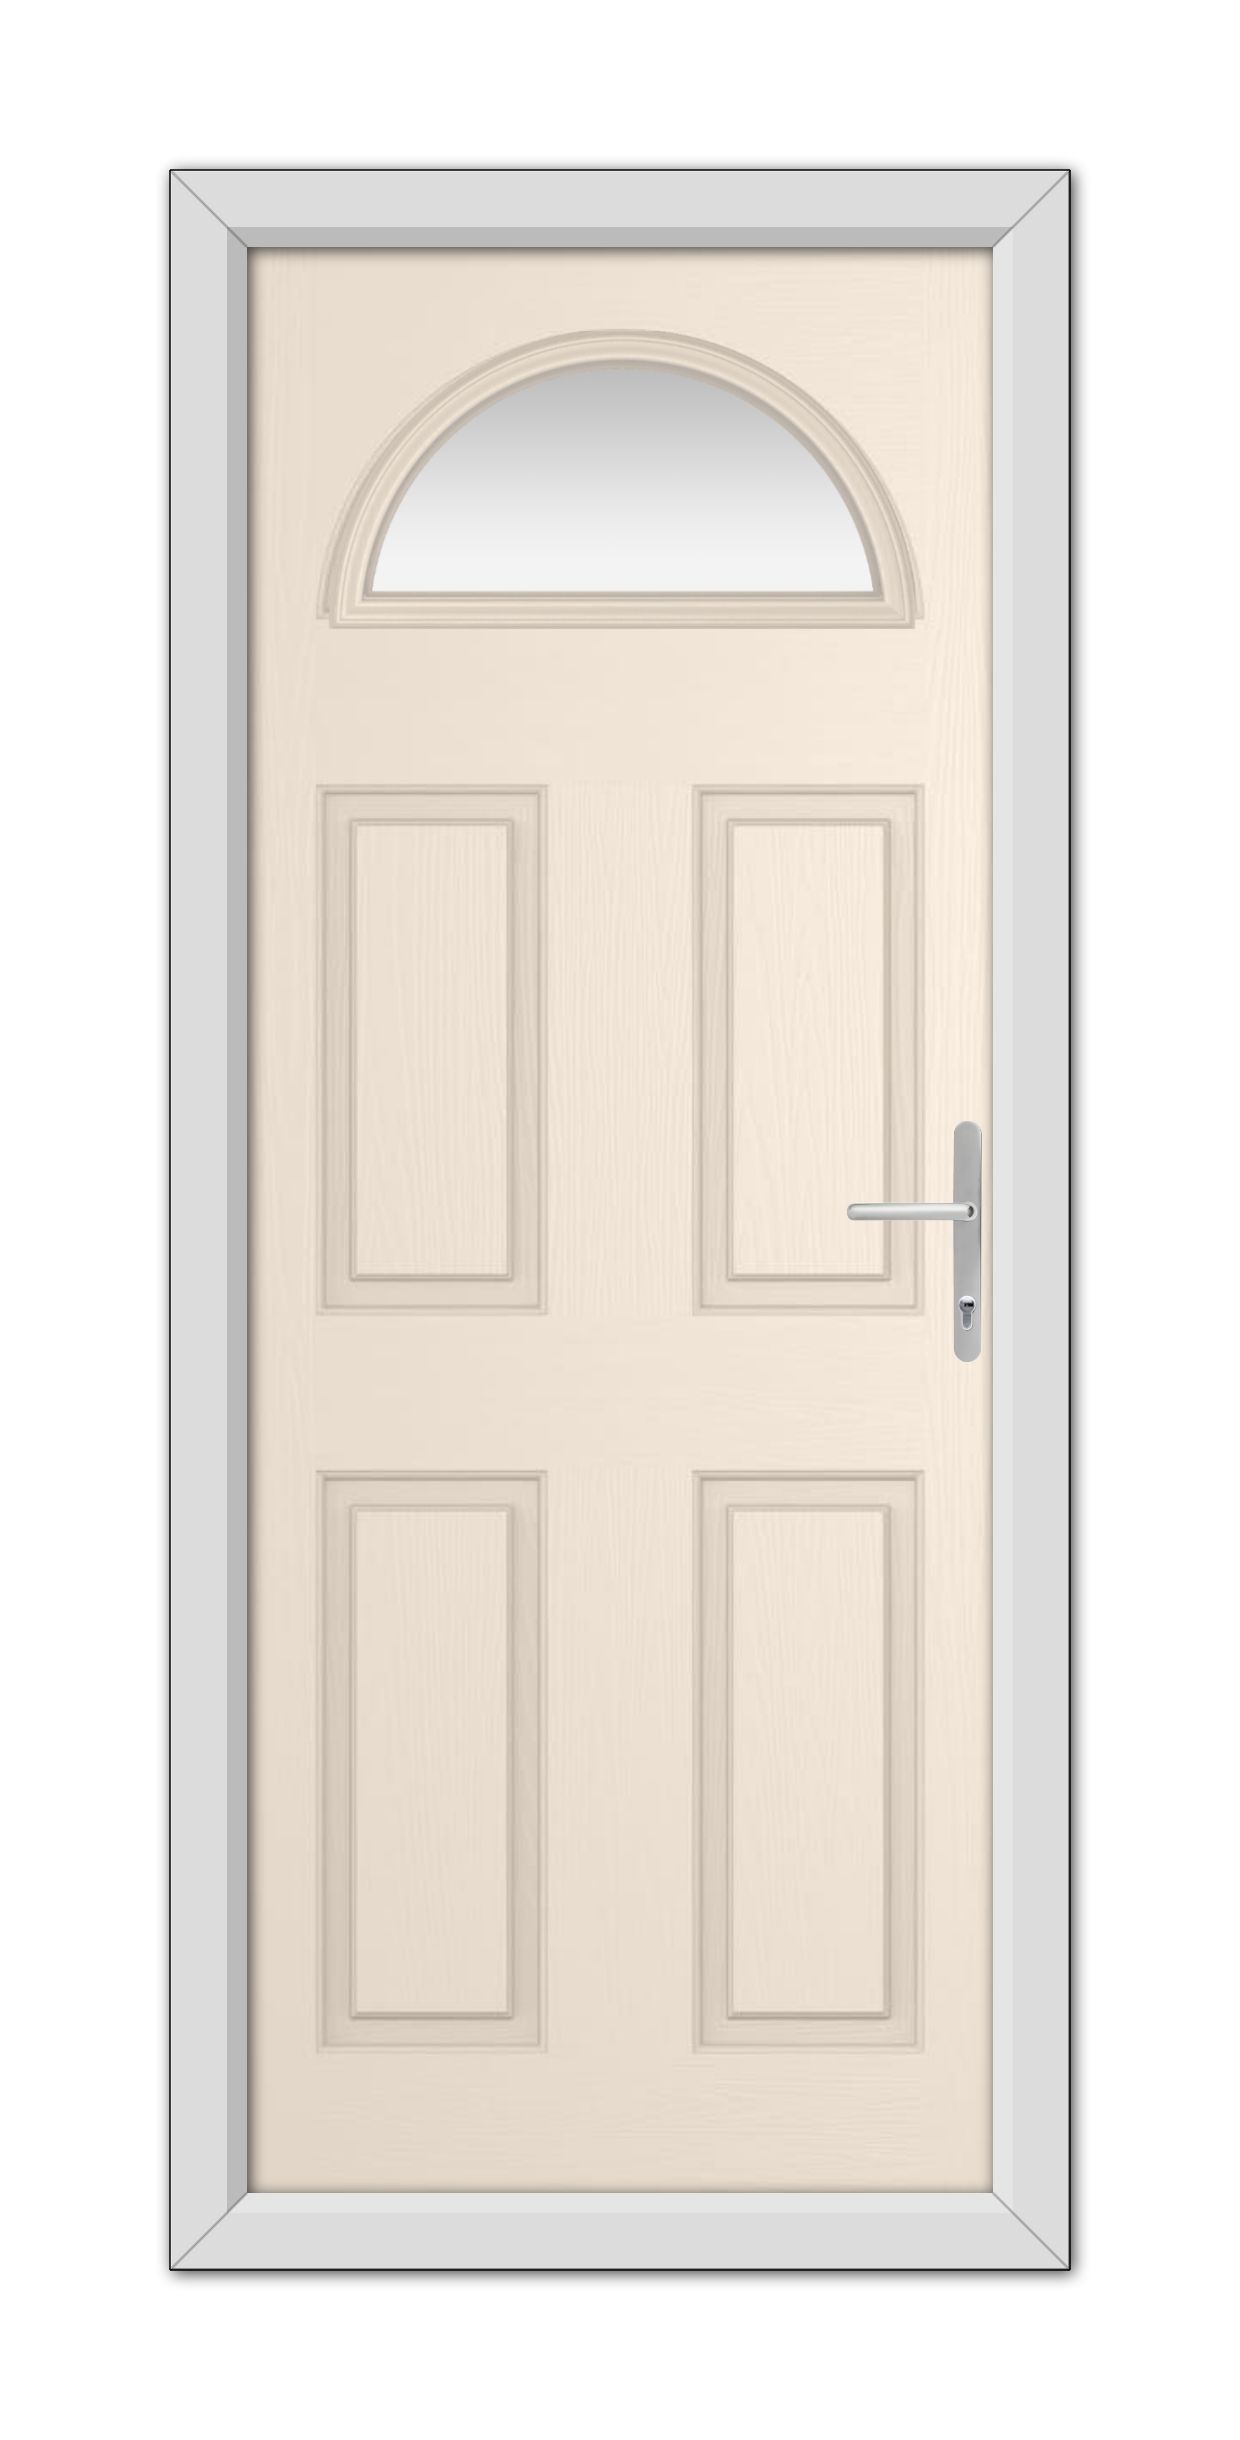 A Cream Winslow 1 Composite Door 48mm Timber Core with six panels and an arched window at the top, framed in a white doorframe with a metal handle on the right side.